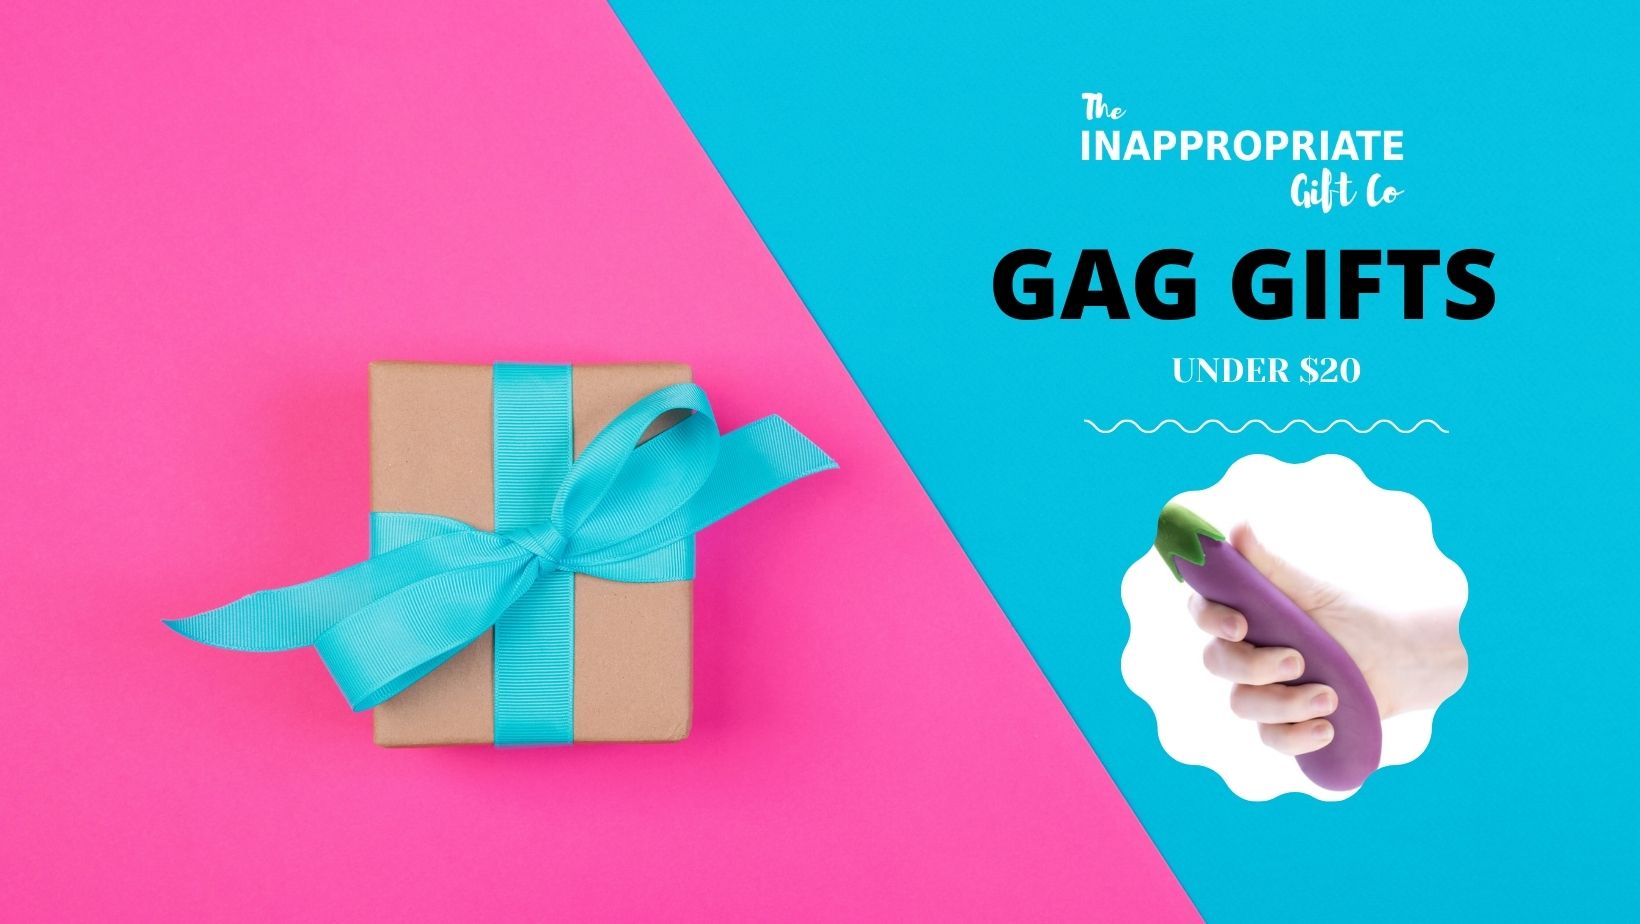 Gag Gifts Under $20: Affordable Fun for Everyone